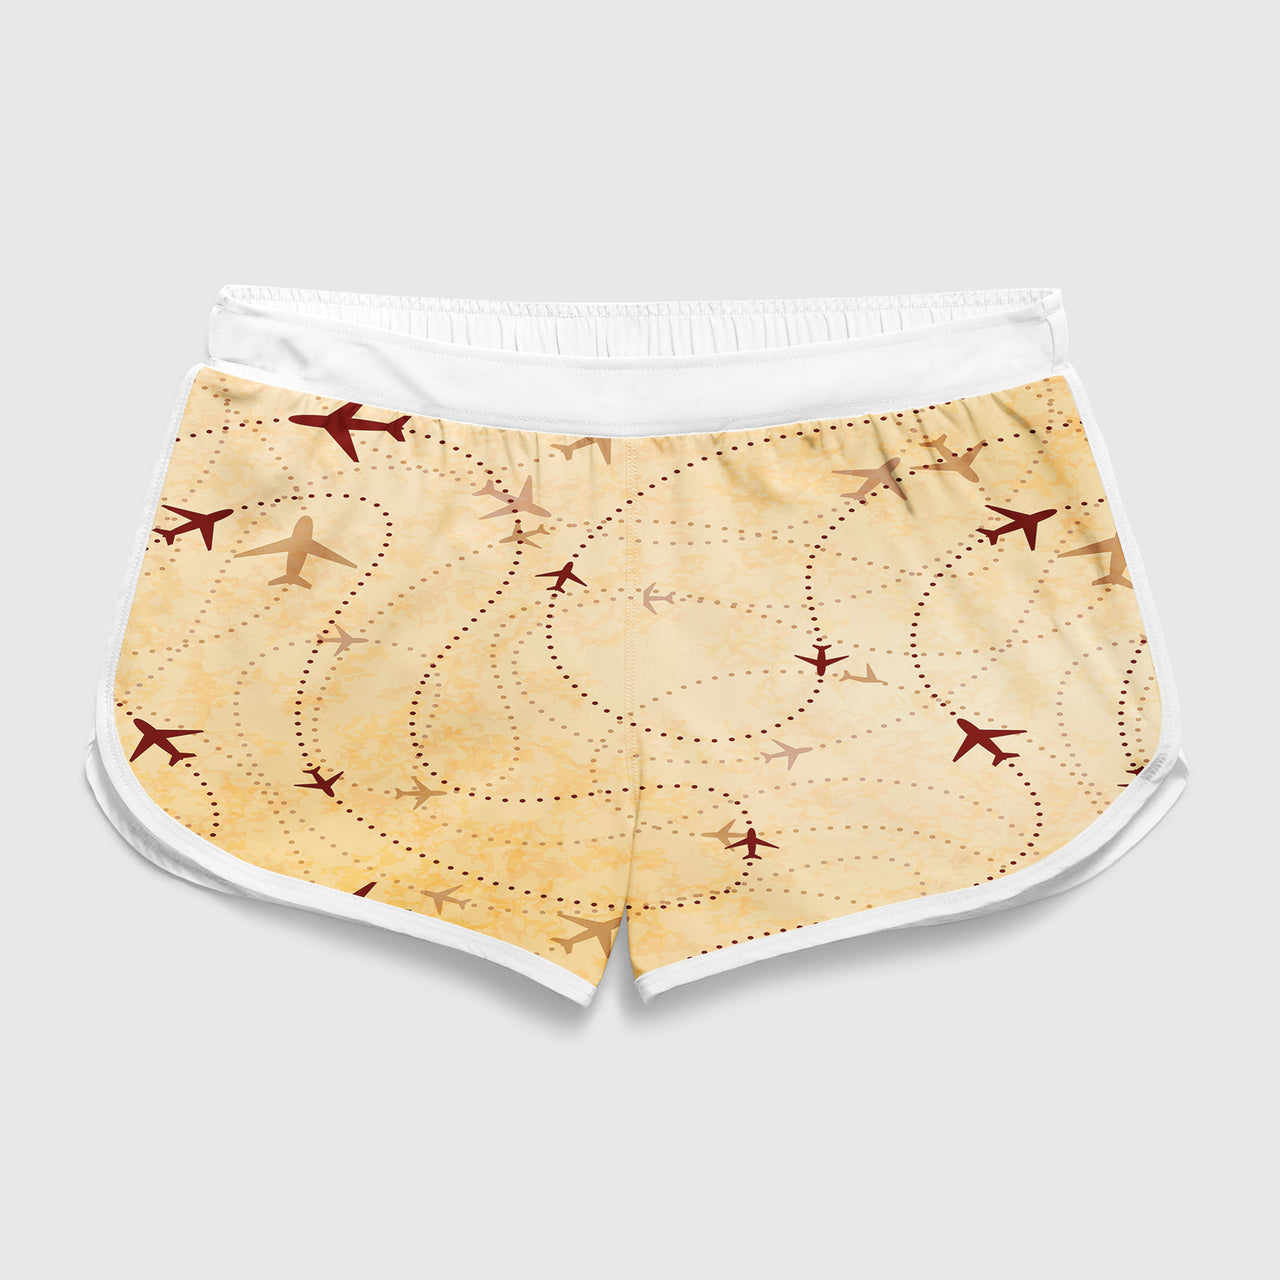 Vintage Travelling with Aircraft Designed Women Beach Style Shorts